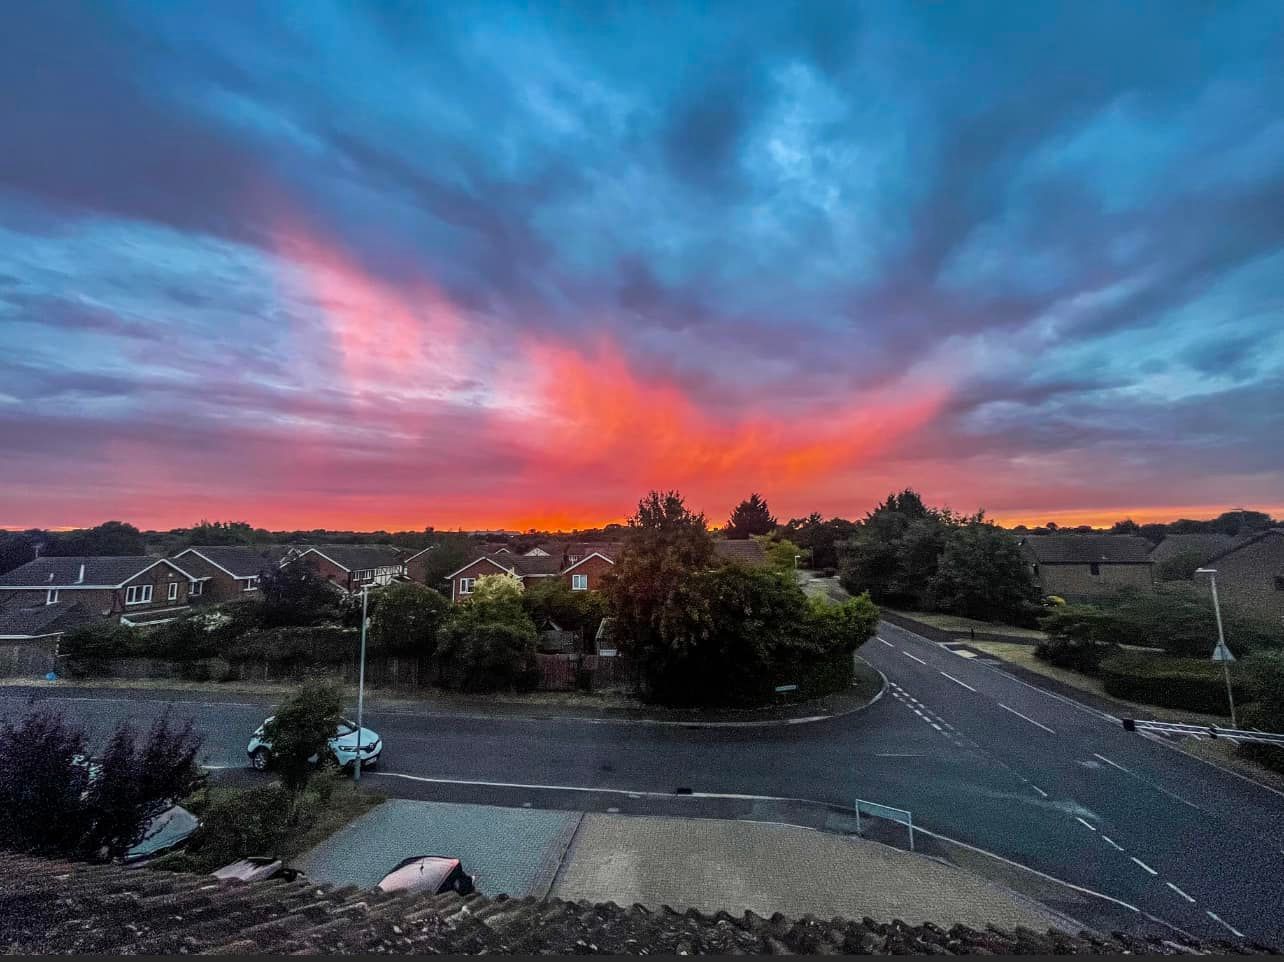 An amazing sunset in Reading (Chris Knight)